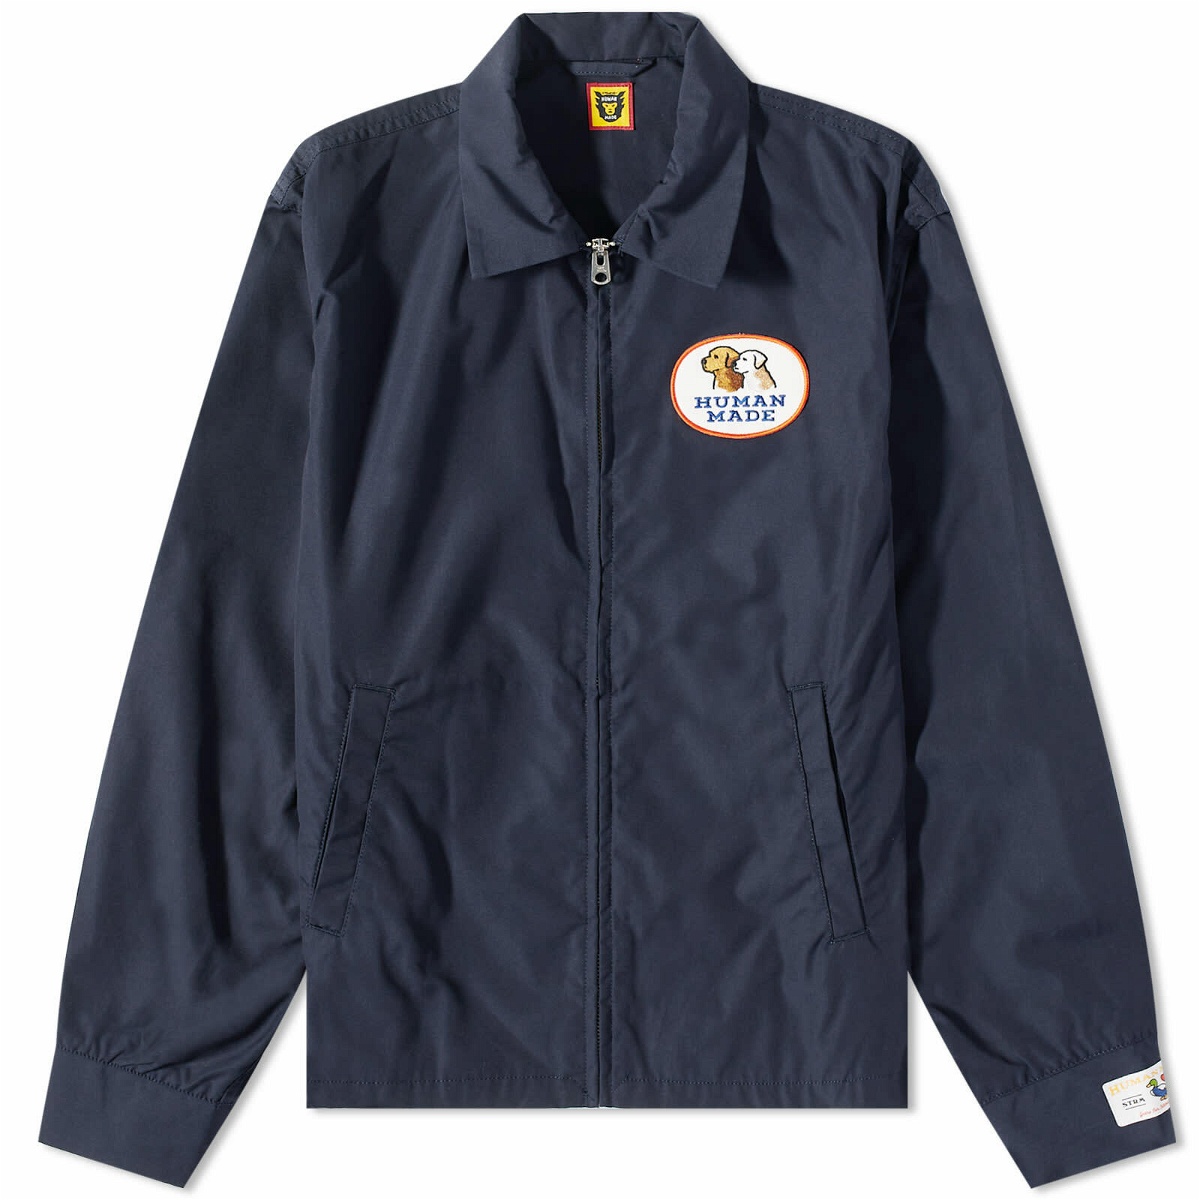 Human Made Men's Drizzler Jacket in Navy Human Made